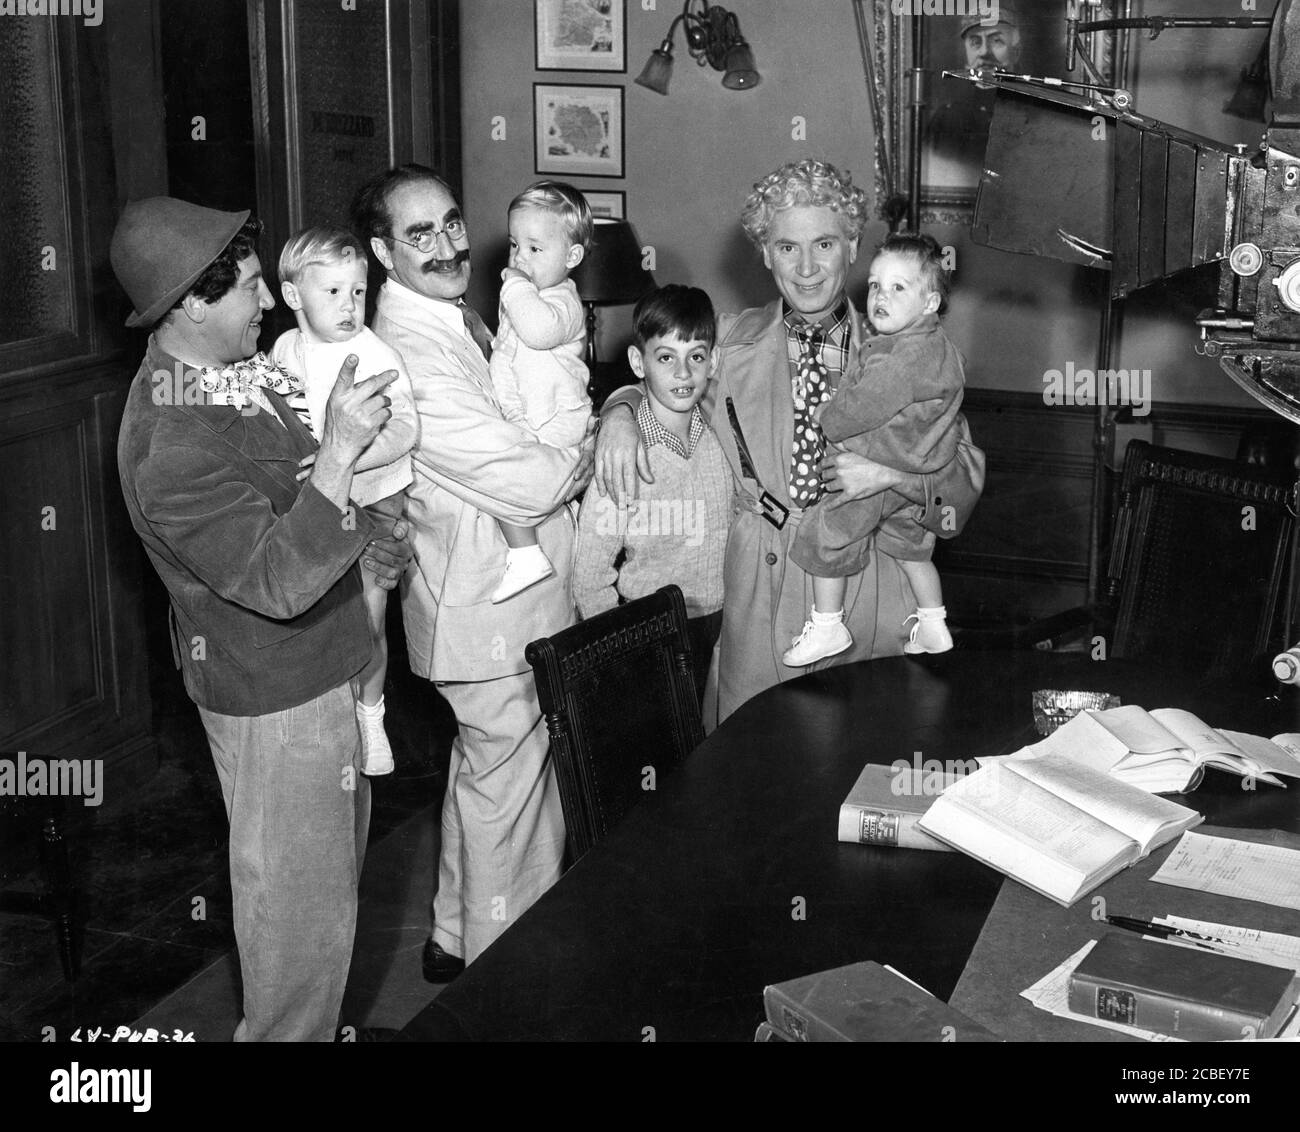 CHICO MARX GROUCHO MARX and HARPO MARX on set candid with Harpo's 4 adopted children MINNIE, JIMMIE, BILLY WOOLLCOTT and ALEXANDER during filming of A NIGHT IN CASABLANCA 1946 director ARCHIE L. MAYO producer David L. Loew Loma Vista Productions / United Artists Stock Photo